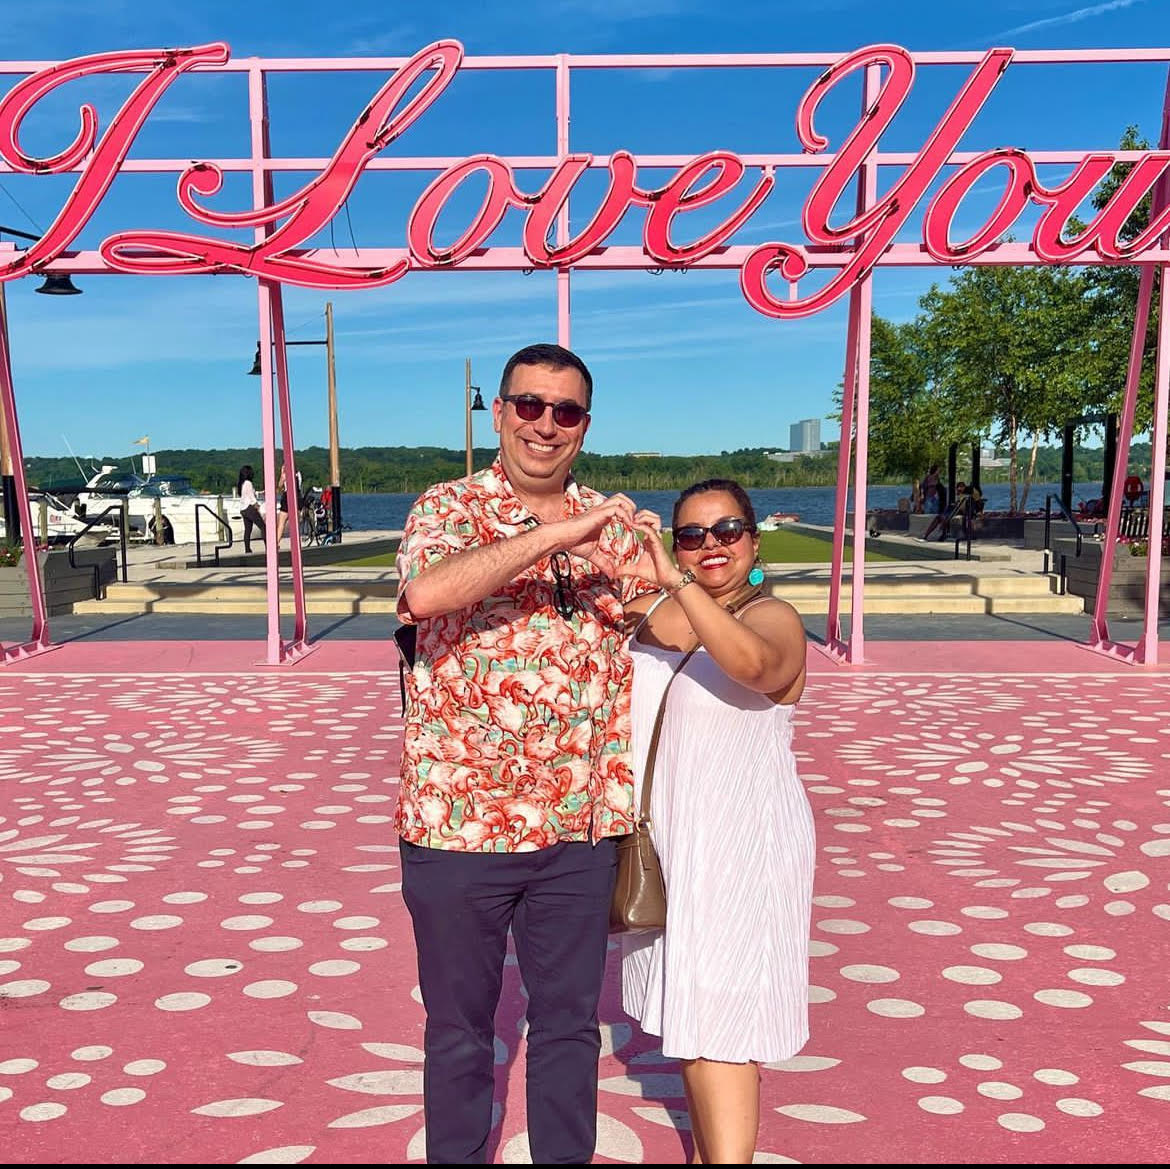 Veronica Yale and husband Roburt Yale pose in front of Old Town’s “I Love You” sign. 